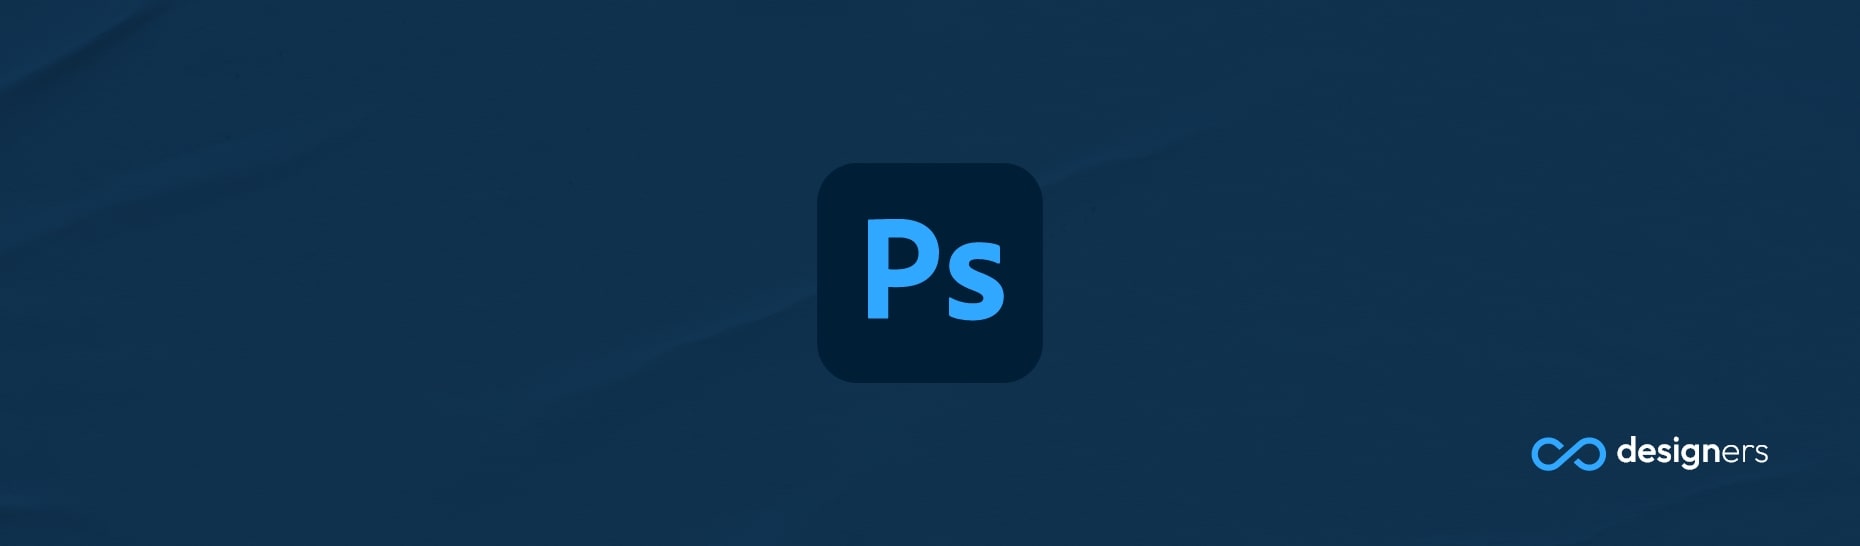 How Do I Edit a PSD File in Photoshop?